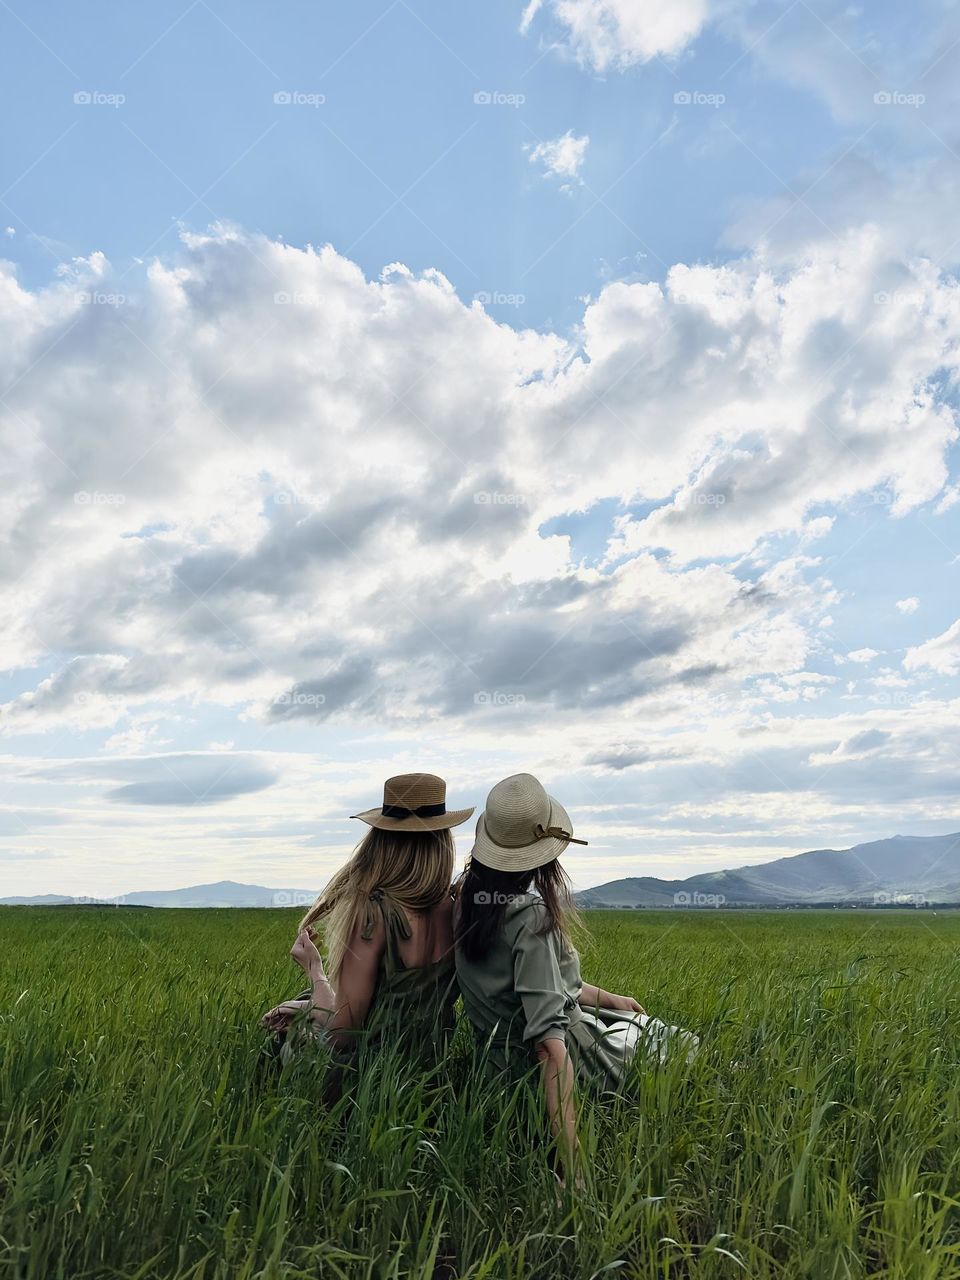 two girls sisters on a picnic in a field looking at the sky